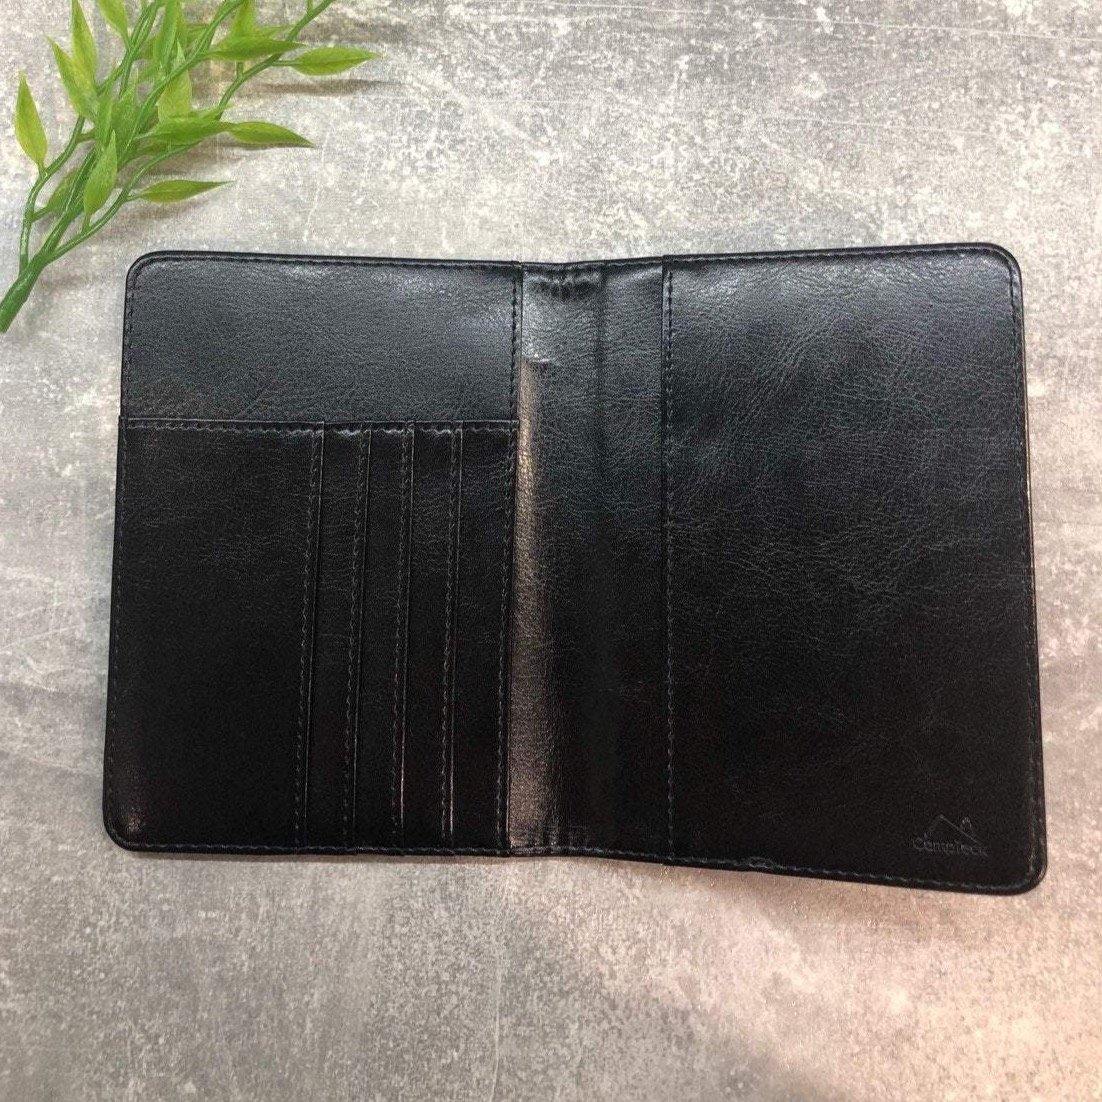 Black Pu leather passport holder personalised with name or initials - PersonalisebyLisa